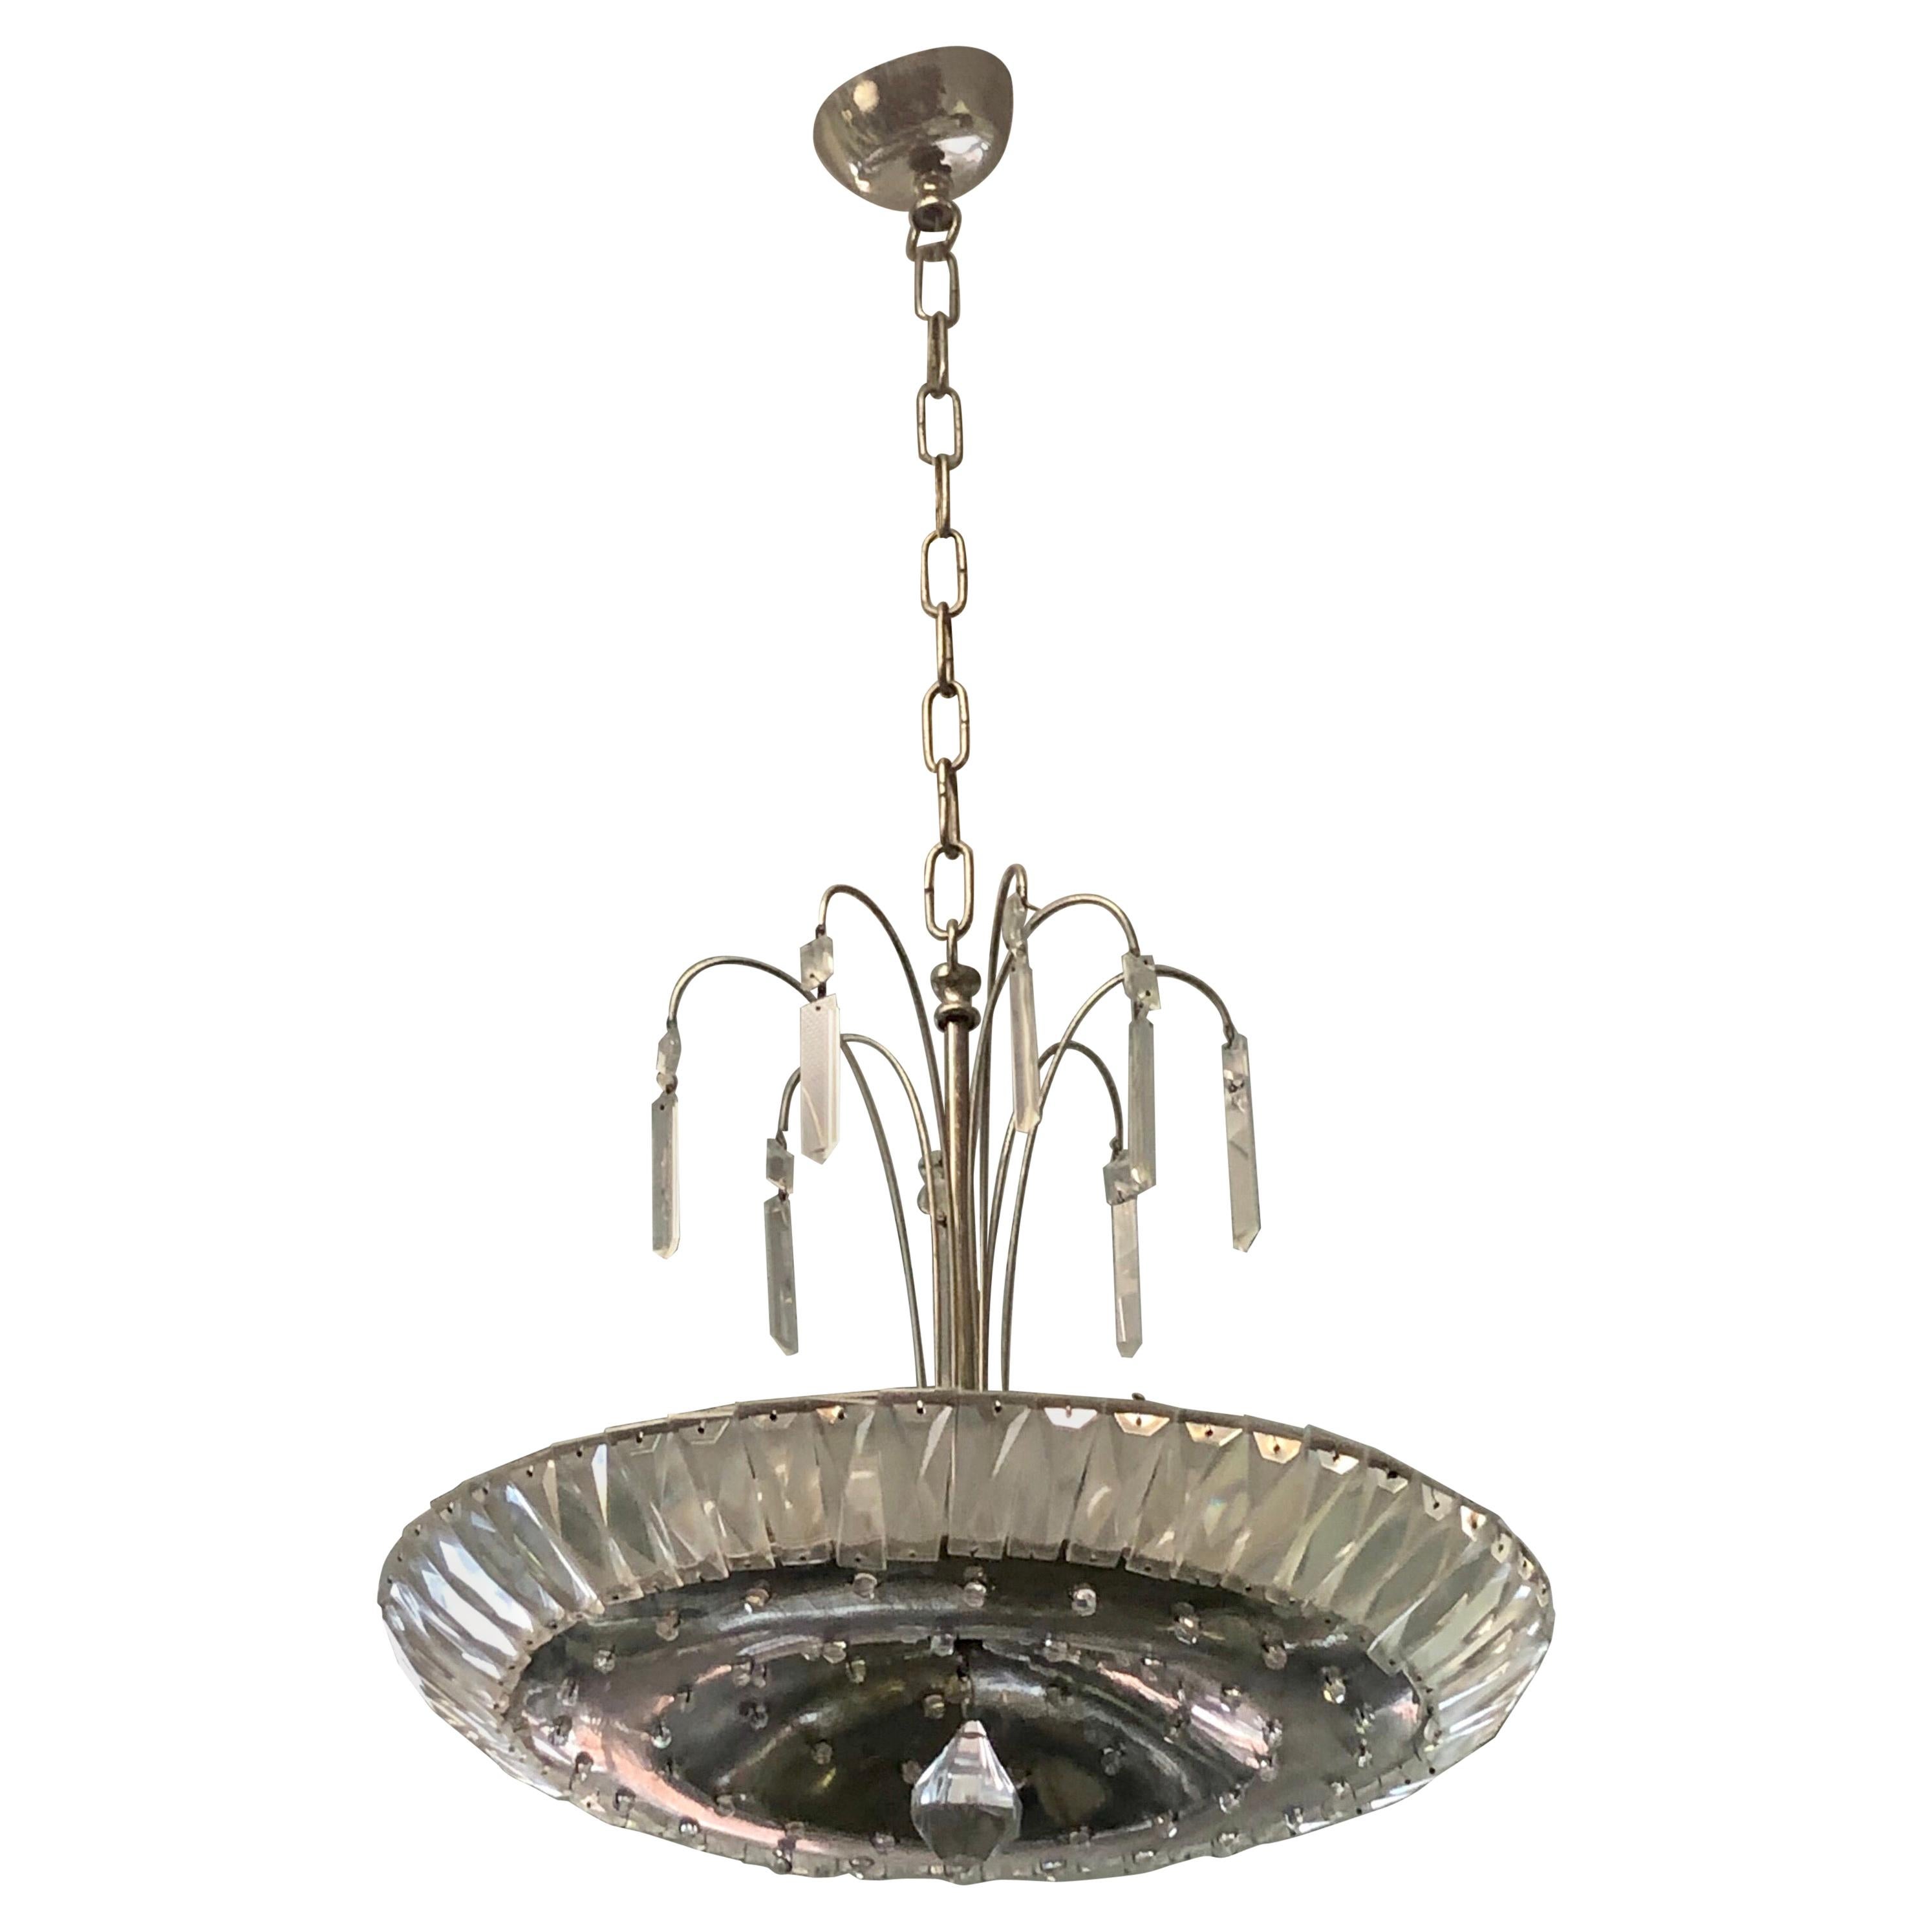 French Mid-Century Modern Neoclassical Nickel and Crystal Chandelier / Pendant For Sale